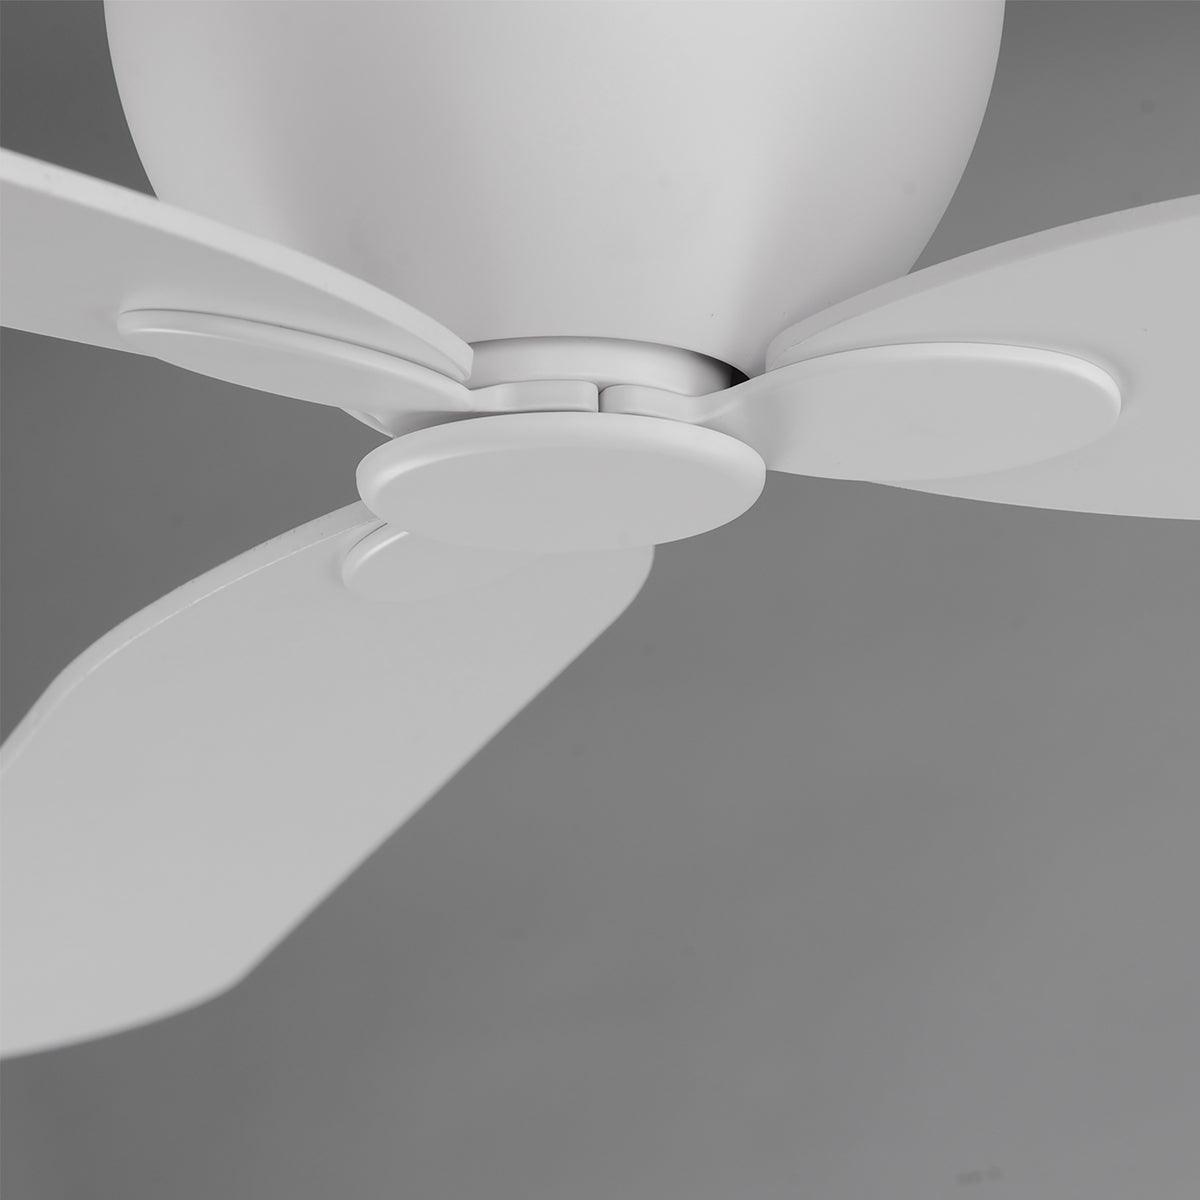 Lowell 52 Inch 3-Blade Hugger Ceiling Fan With Wall Control, Matte White Finish